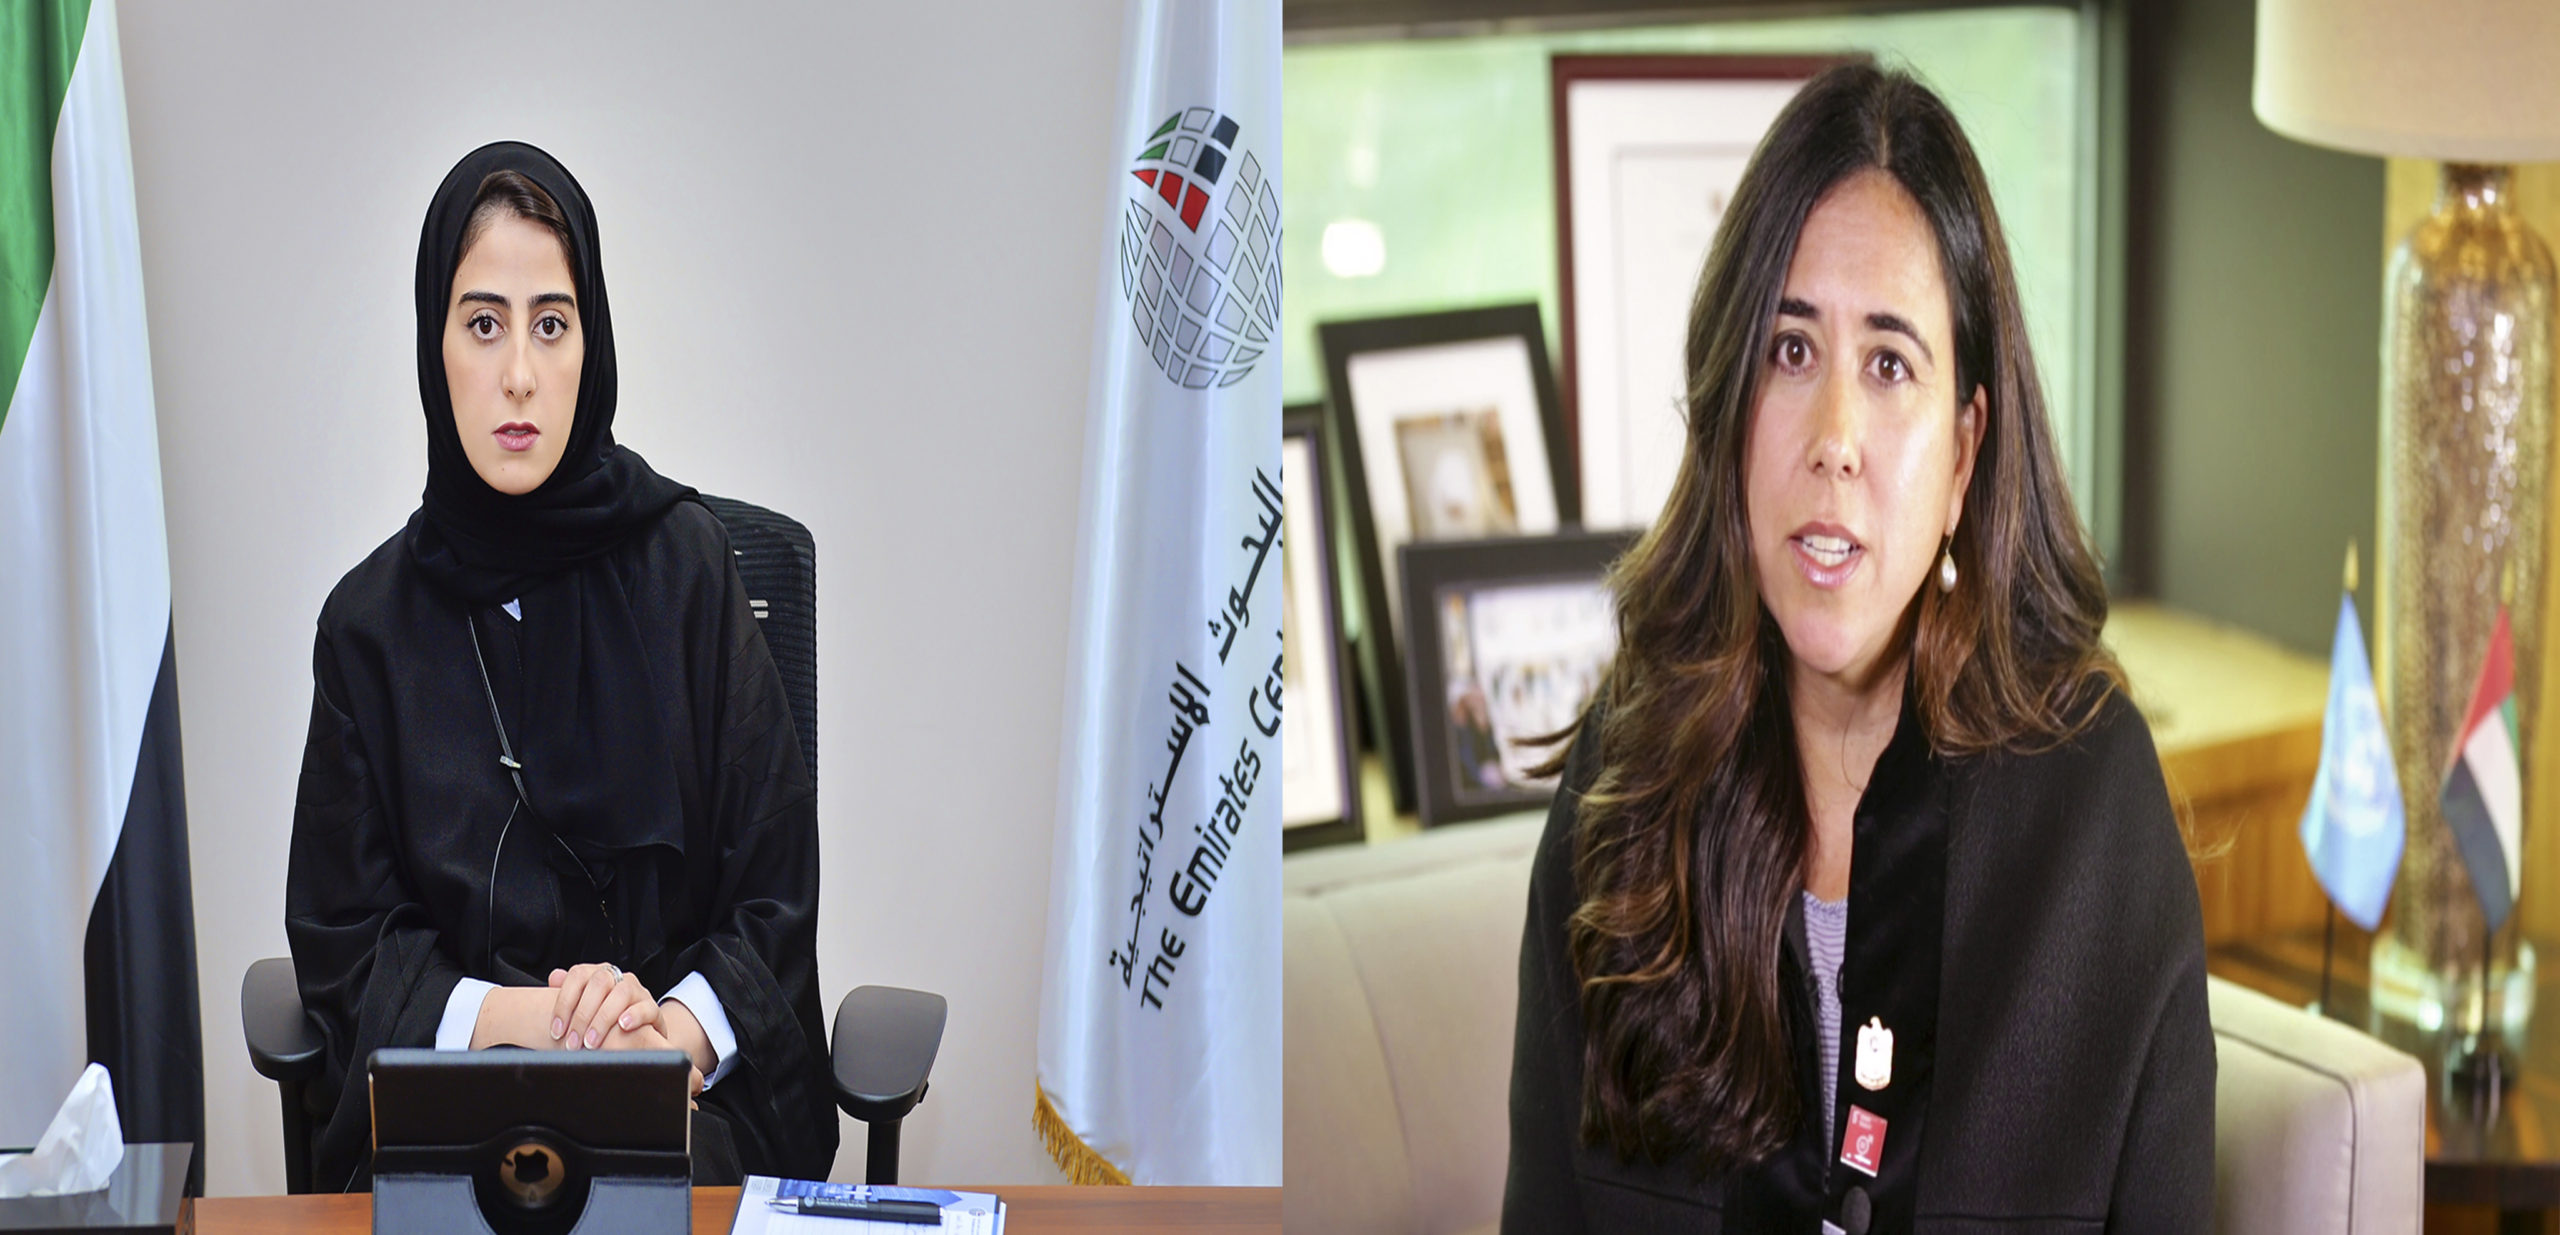 Image for UAE Is Committed To Consolidating International Cooperation, Sustainable Development: Lana Nusseibeh